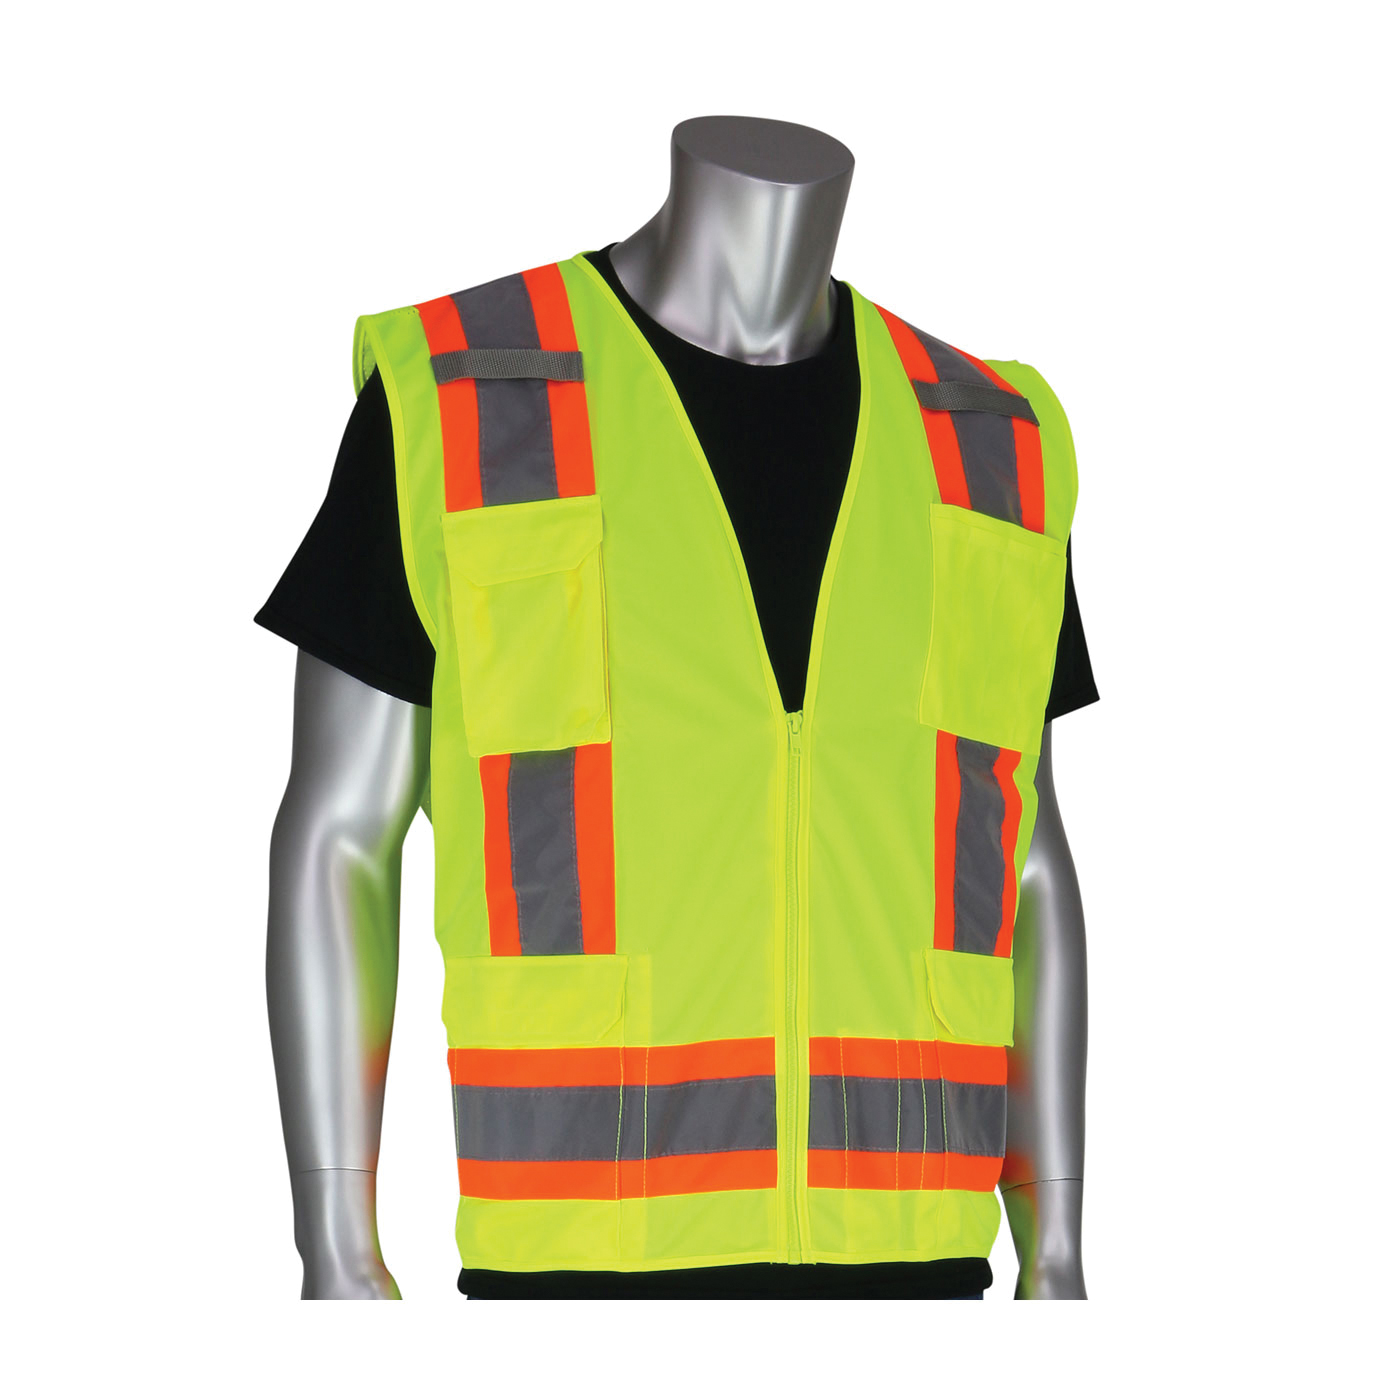 PIP® 302-0500-YEL/3X 2-Tone Surveyor Safety Vest, 3XL, Hi-Viz Lime Yellow, Polyester/Solid Tricot, Zipper Closure, 11 Pockets, ANSI Class: Class 2, Specifications Met: ANSI 107 Type R